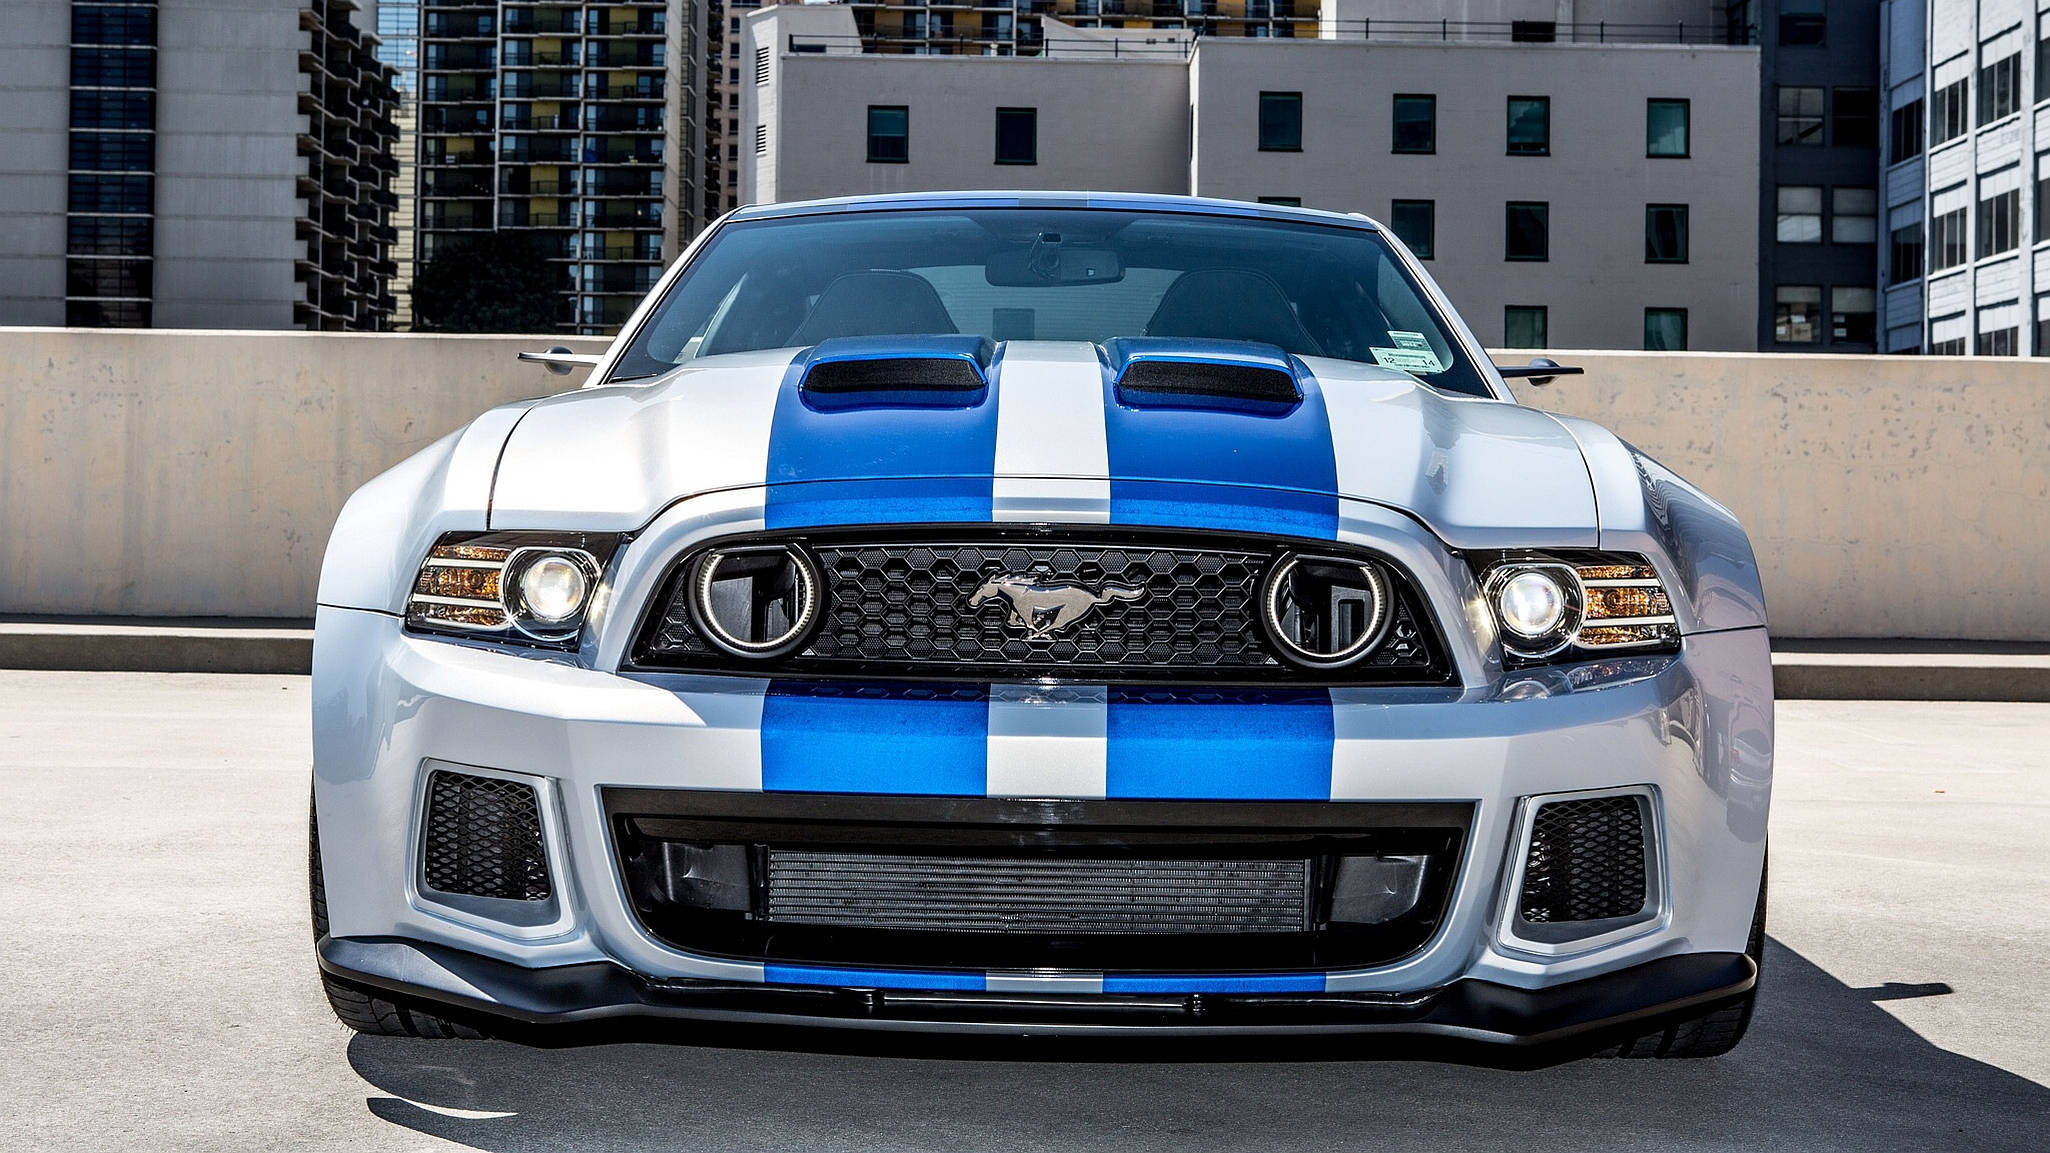 Ford Mustang Hd Blue And White Color Wallpaper